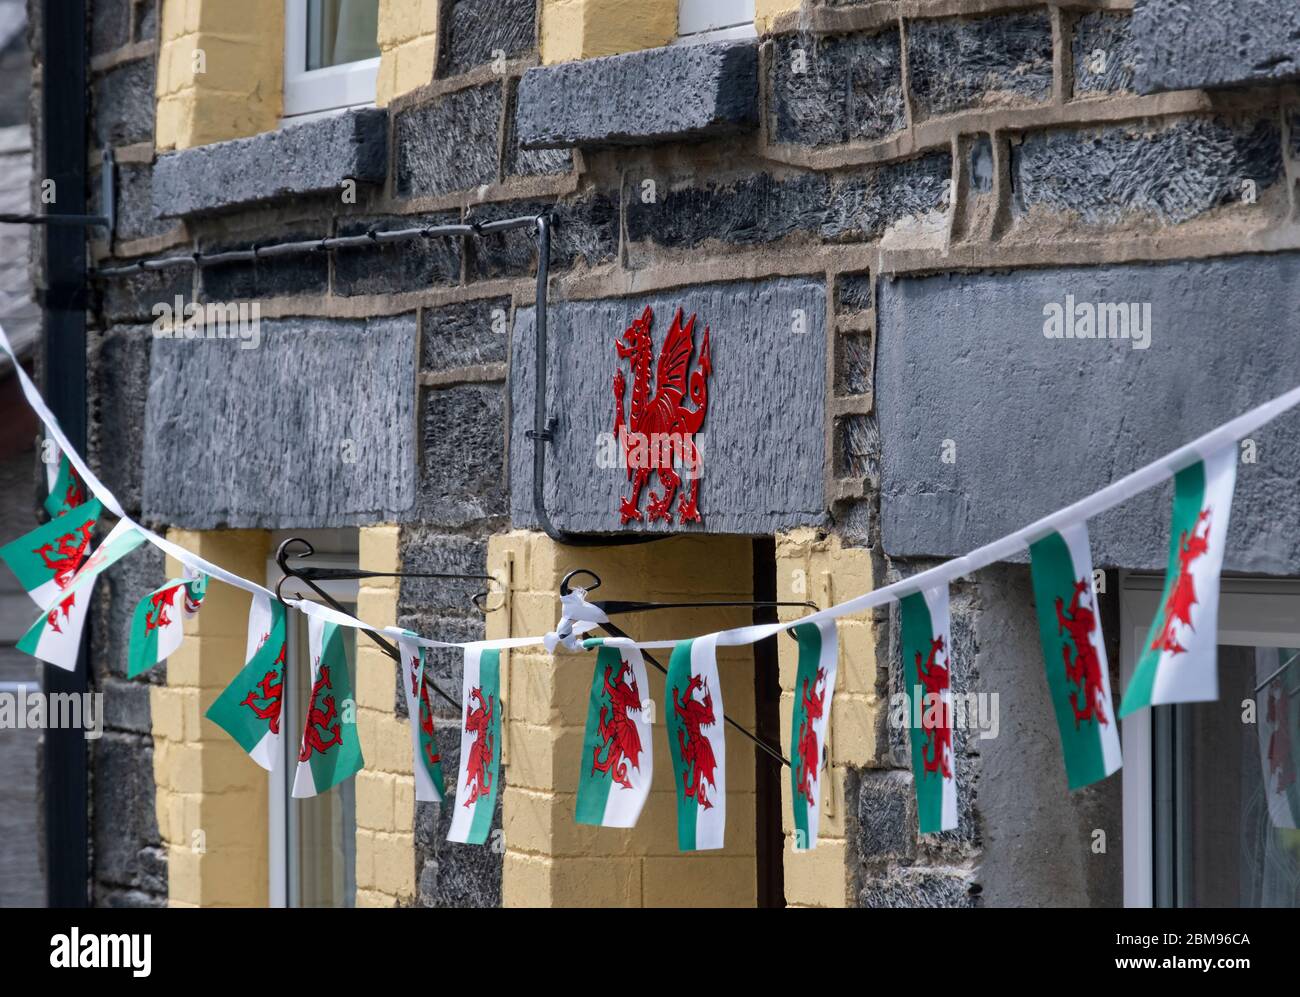 Traditional Welsh Bunting and Red Welsh Dragon on doorway in Penmachno, Penmachno, Snowdonia, North Wales, UK Stock Photo